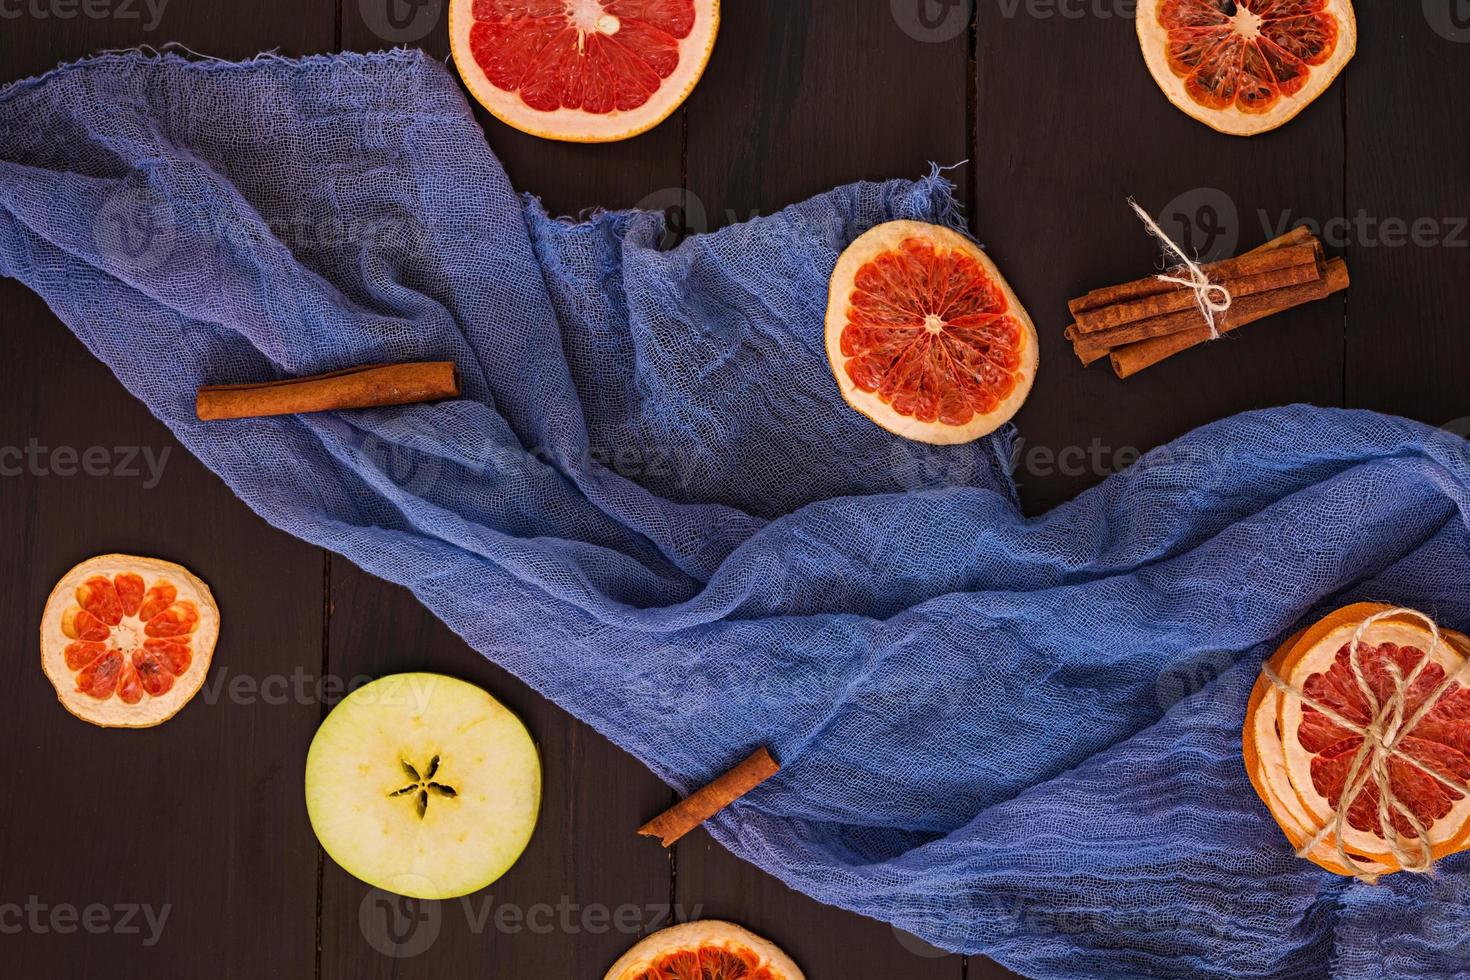 Apple, grapefruit and cinnamon on wooden background. Ingredient for hot mulled wine. Top view photo